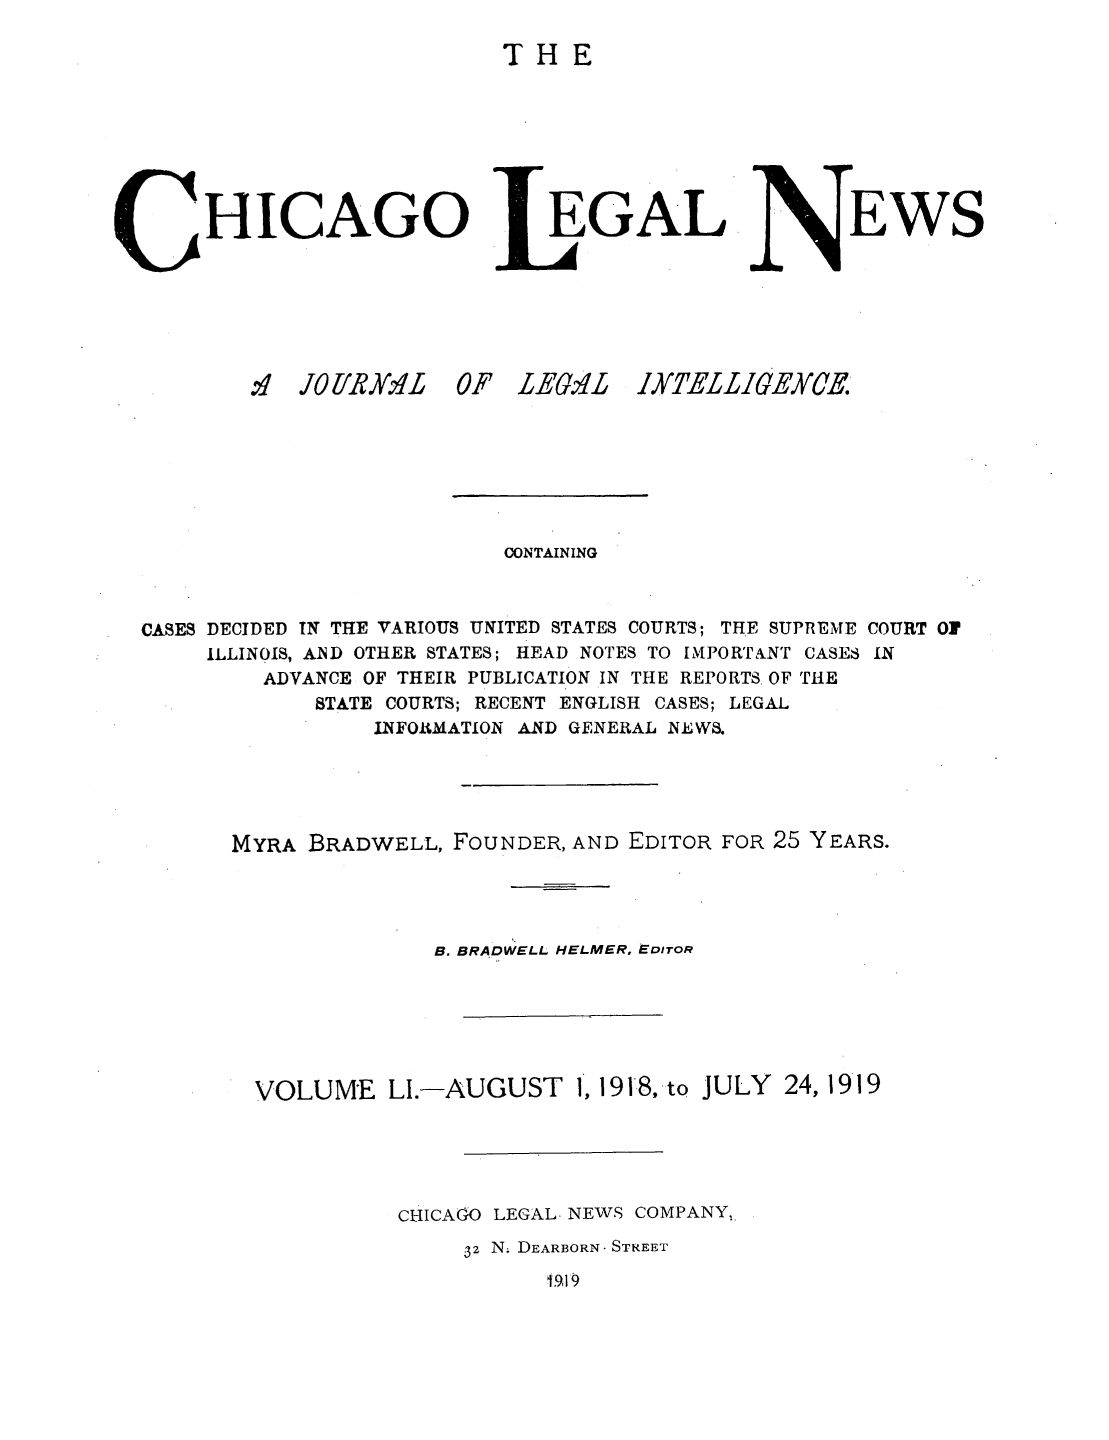 handle is hein.journals/chiclene51 and id is 1 raw text is: THEHICAGO.:  JO[/RA Y'L  0EGALF LEGALEWSCONTAININGCASES DECIDED TN THE VARIOUS UNITED STATES COURTS; THE SUPREME COURT OFILLINOIS, AIND OTHER STATES; HEAD NOTES TO IMPORTANT CASES INADVANCE OF THEIR PUBLICATION IN THE REPORTS OF THESTATE COURTS; RECENT ENGLISH CASES; LEGALINFOlRMATION AND GENERAL NEWS.MYRA BRADWELL, FOUNDER, AND EDITOR FOR 25 YEARS.B. BRADWELL HELMER, EDITORVOLUME LI.-AUGUST 1, 1918, to JULY 24, 1919CHICAGO LEGAL- NEWS COMPANY,-32 N. DEARBORN. STREET1,99IXTELLIGEY0E